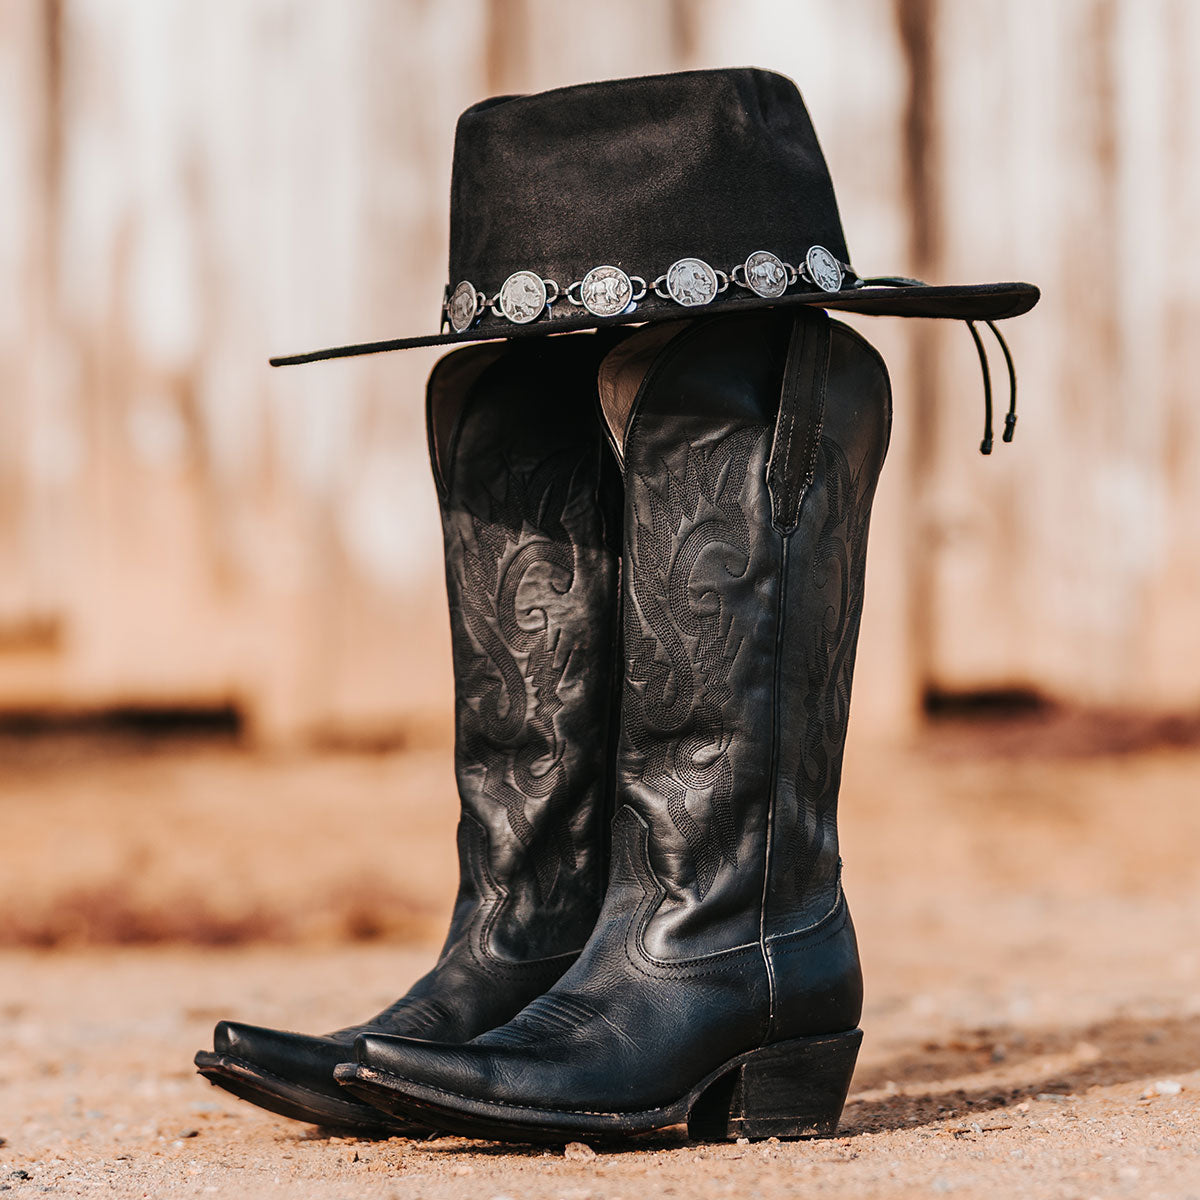 FREEBIRD women's Woodland black leather cowboy boot with stitch detailing and snip toe construction lifestyle